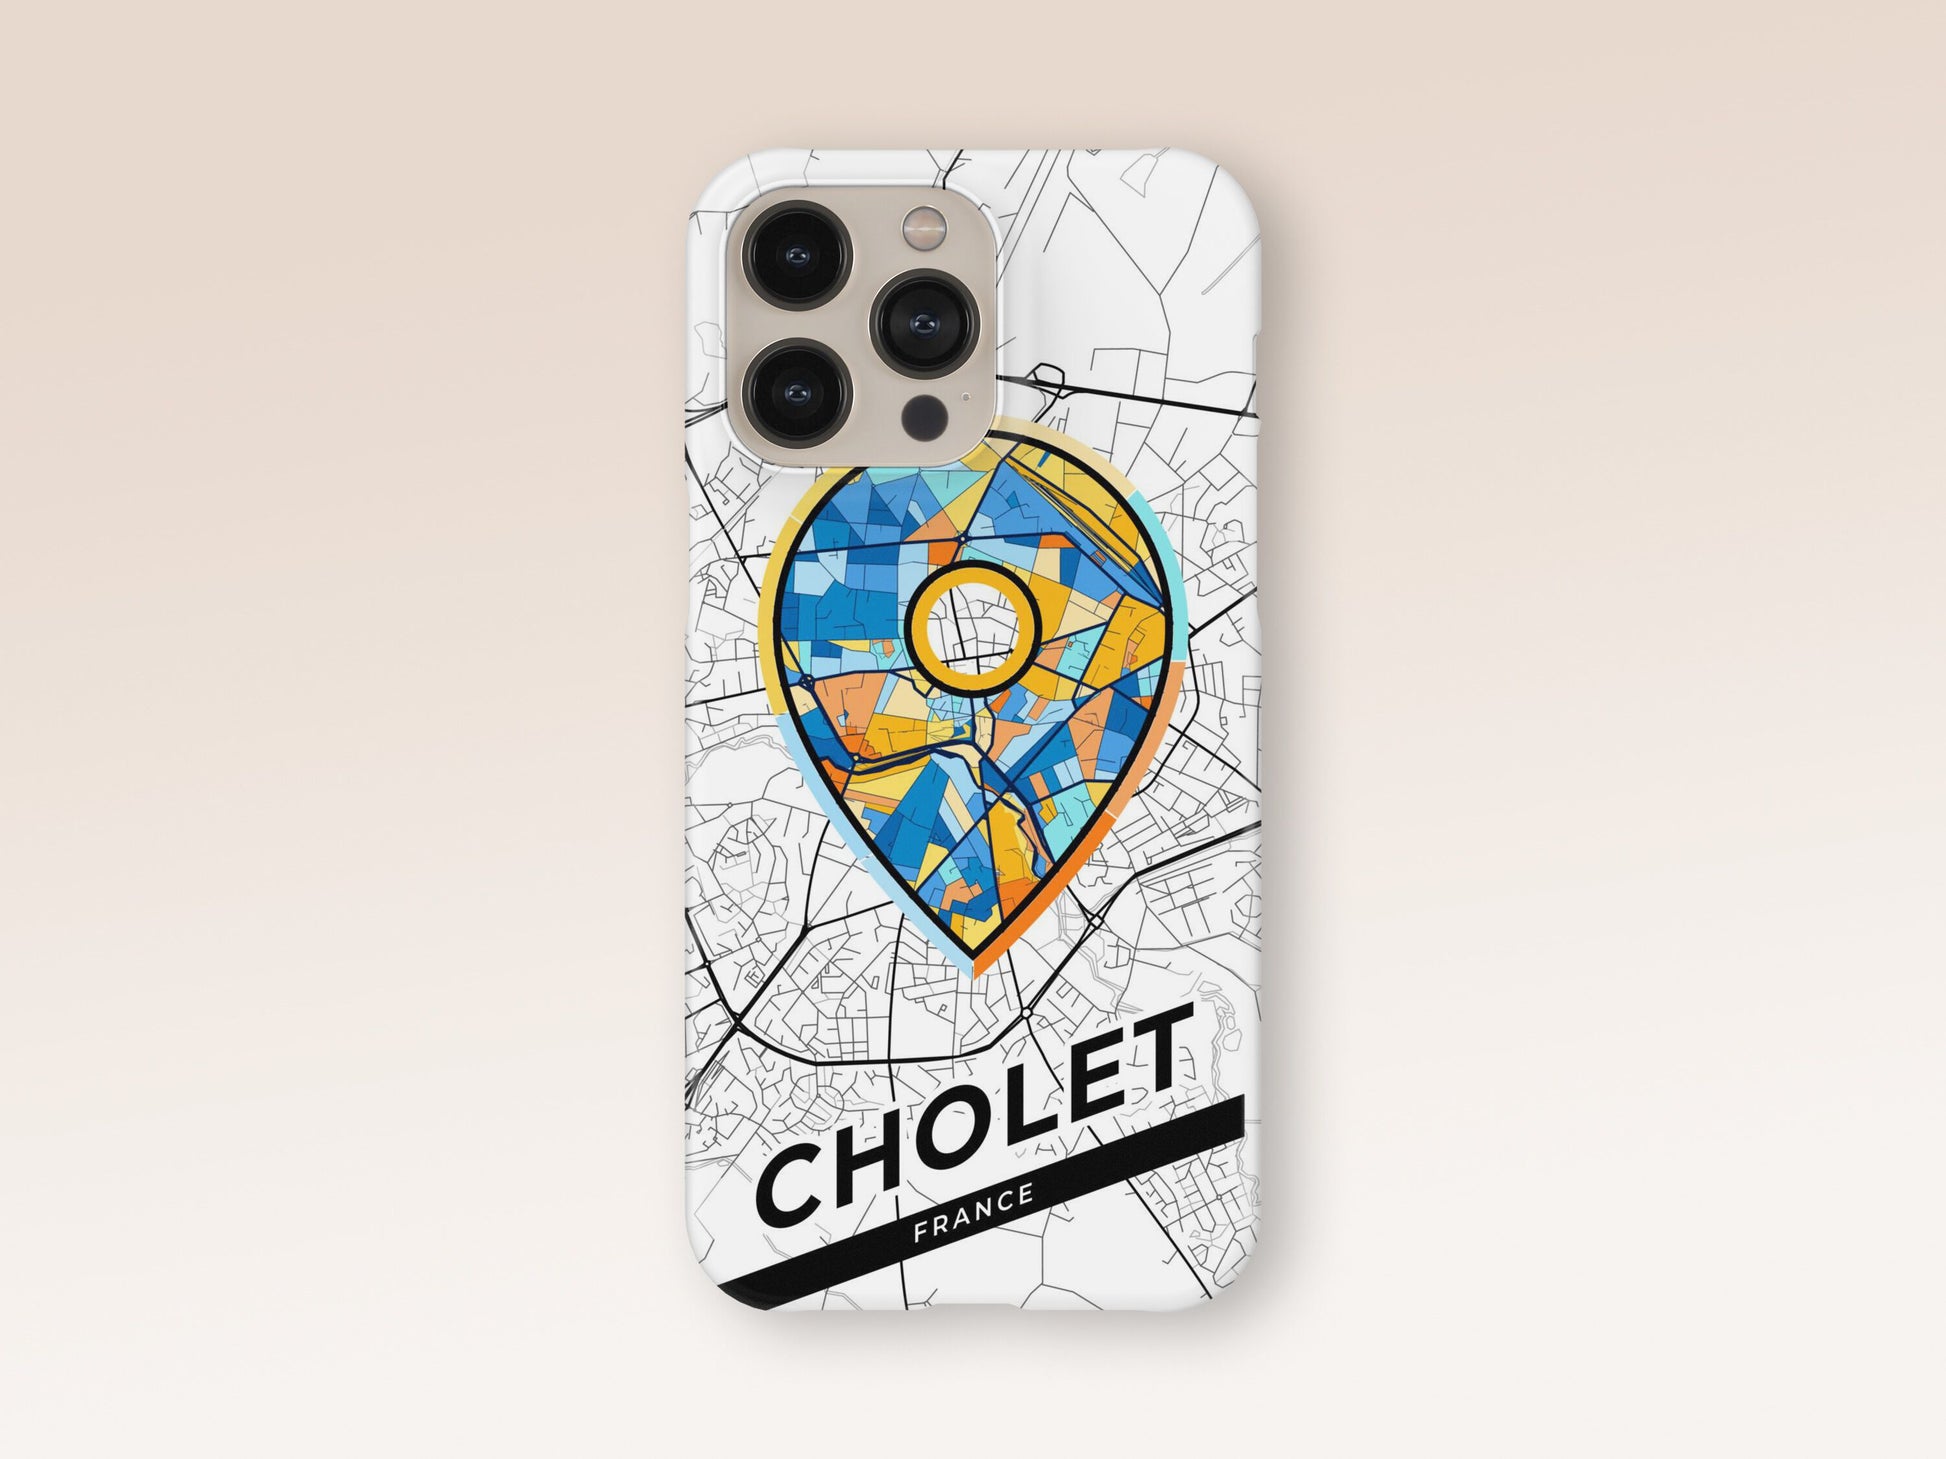 Cholet France slim phone case with colorful icon. Birthday, wedding or housewarming gift. Couple match cases. 1